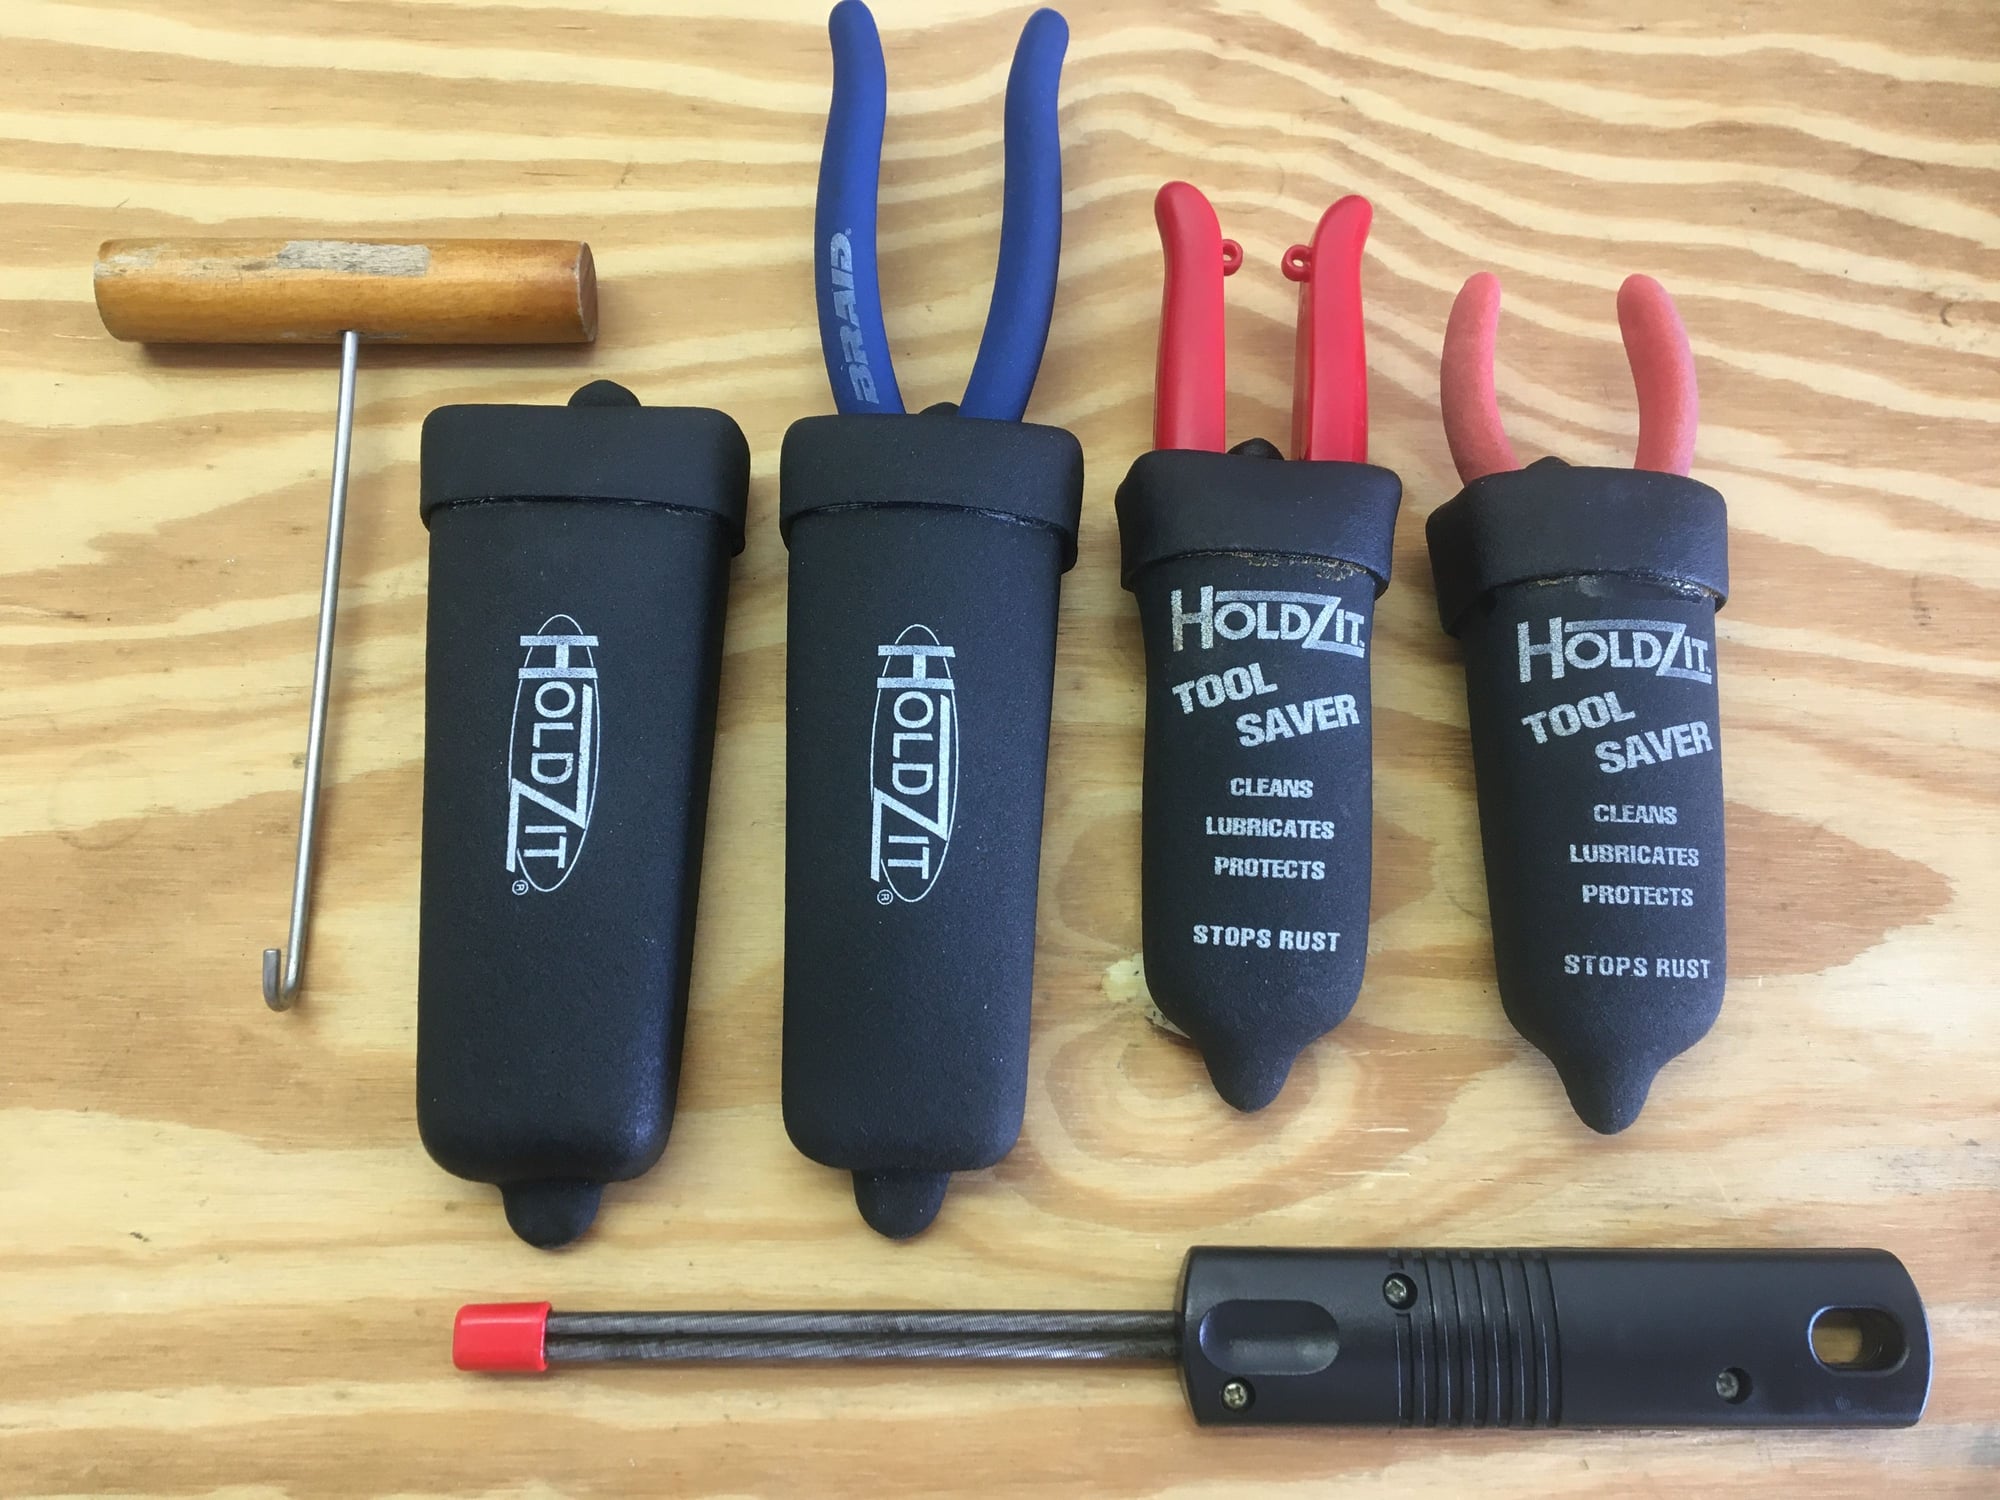 Holdzit Tool Saver Keep your fishing Gear close to you